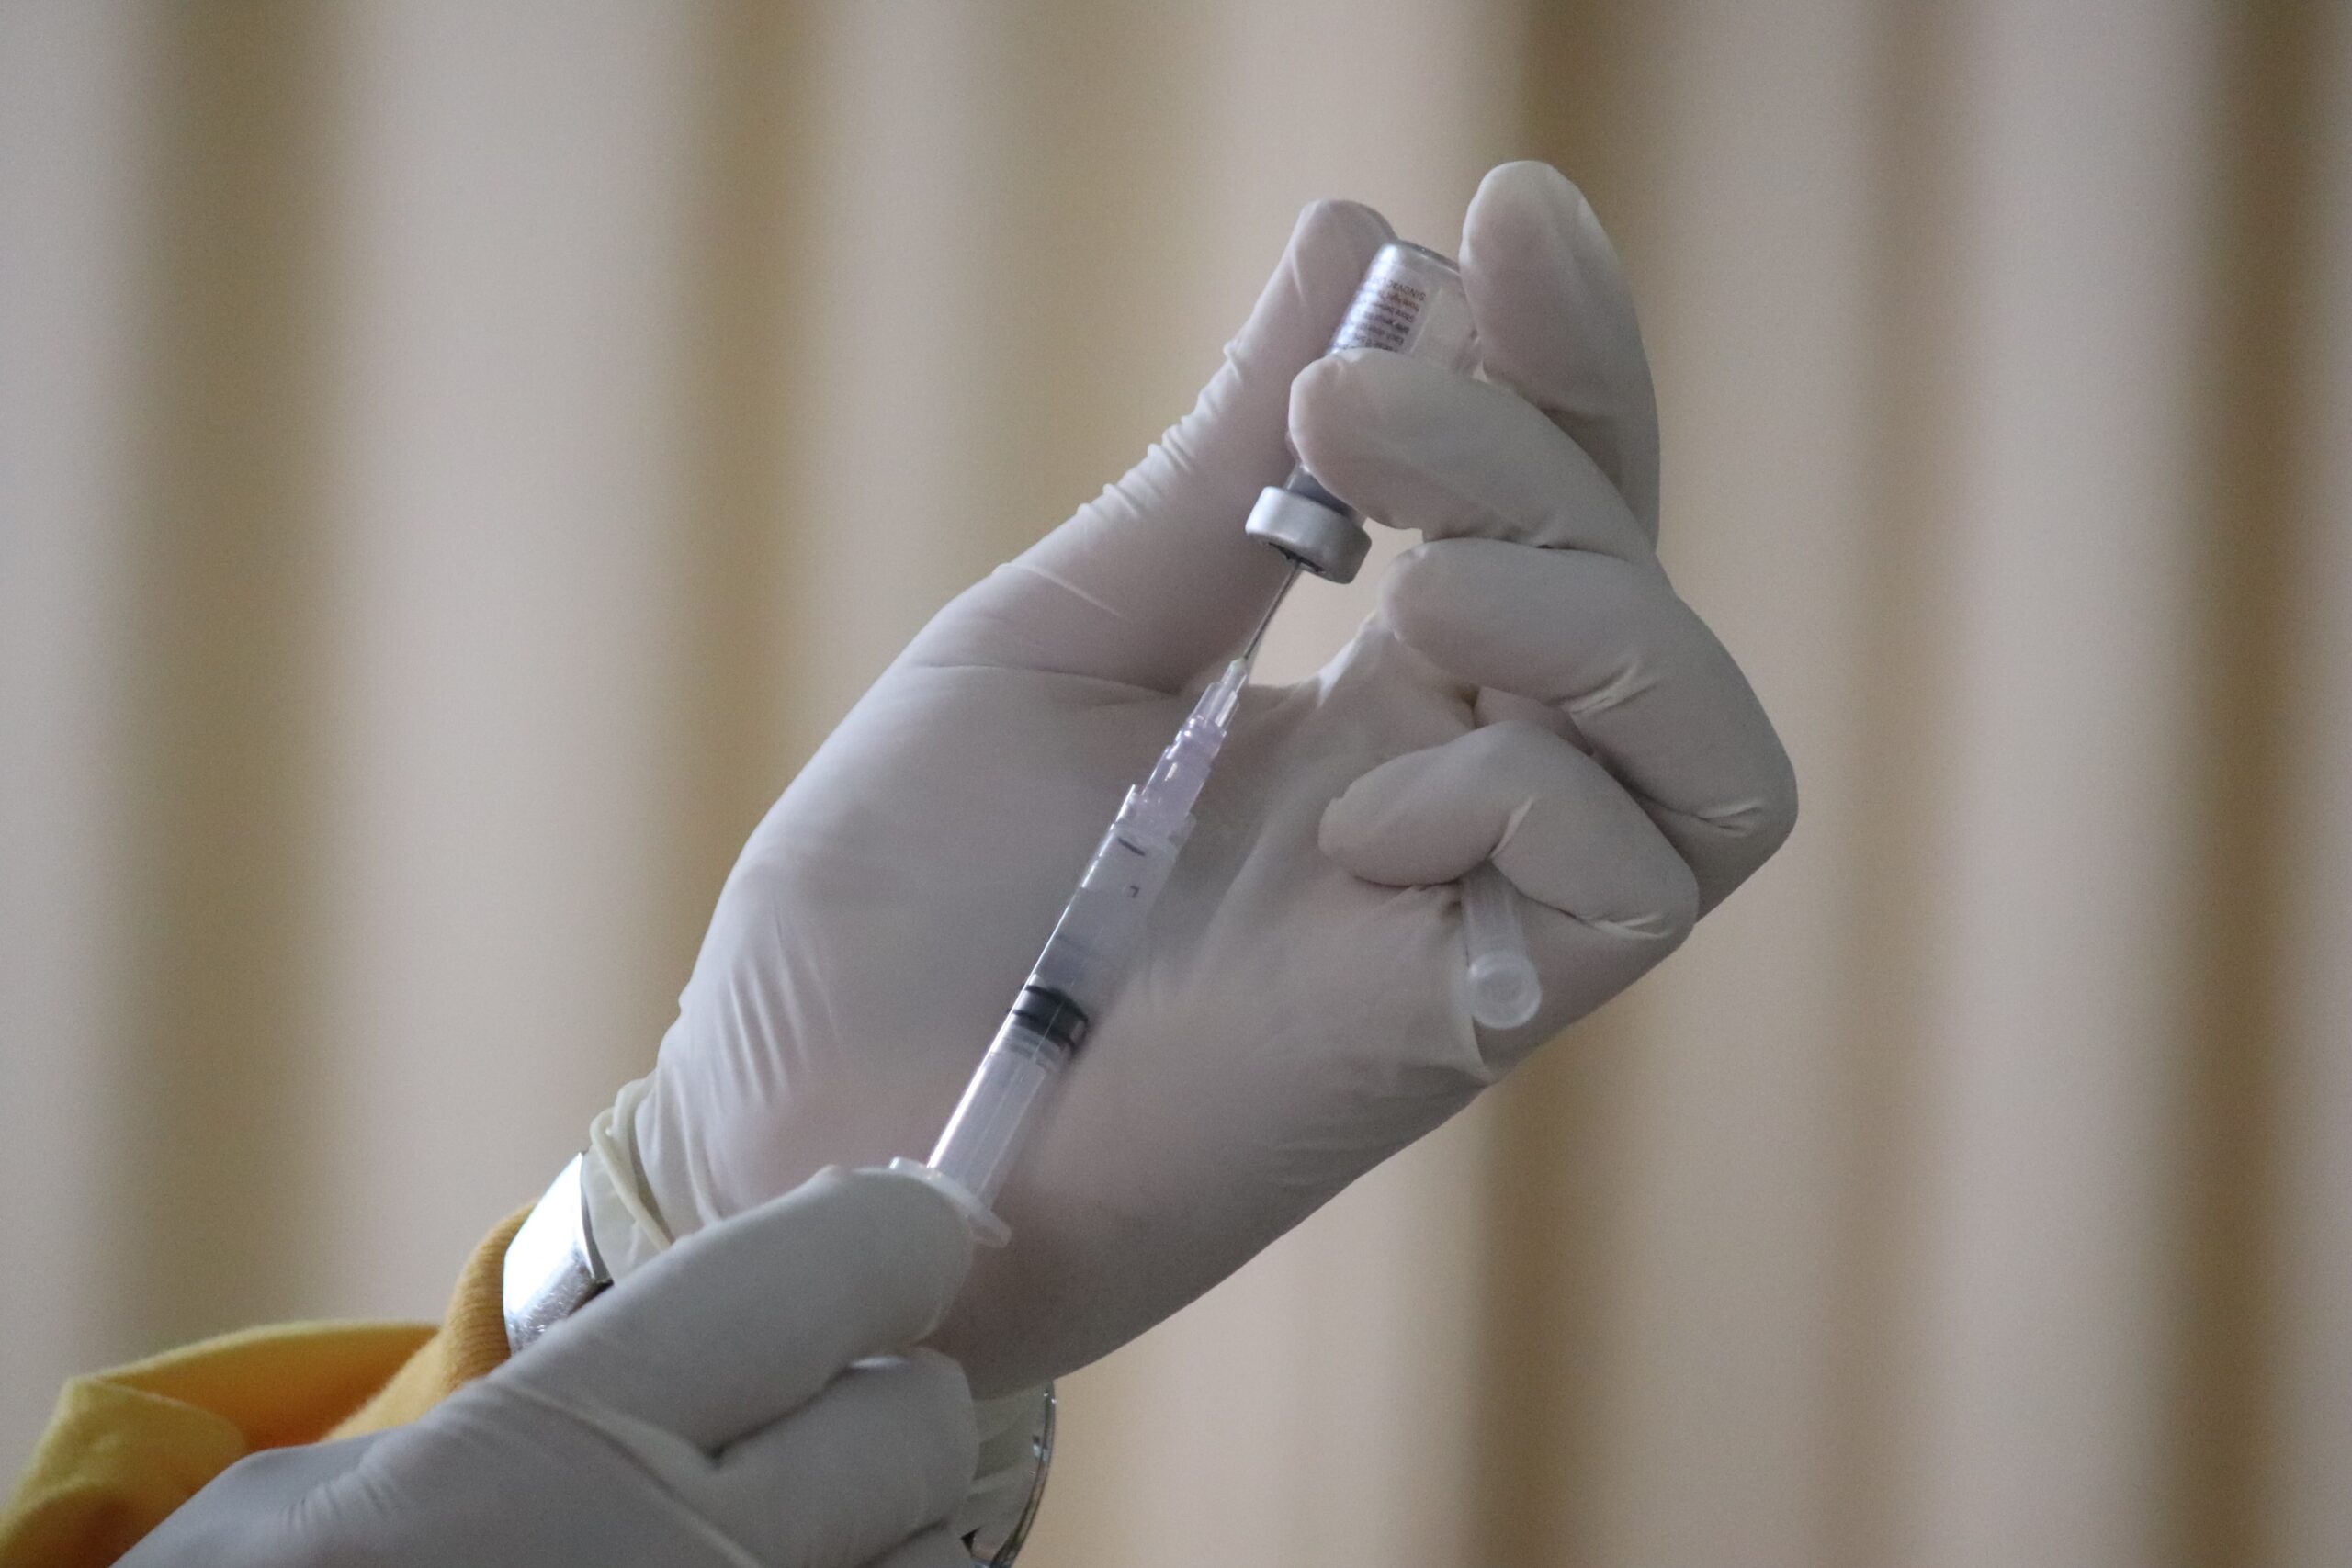 USF Health experts optimistic for increase in vaccination following Pfizer approval